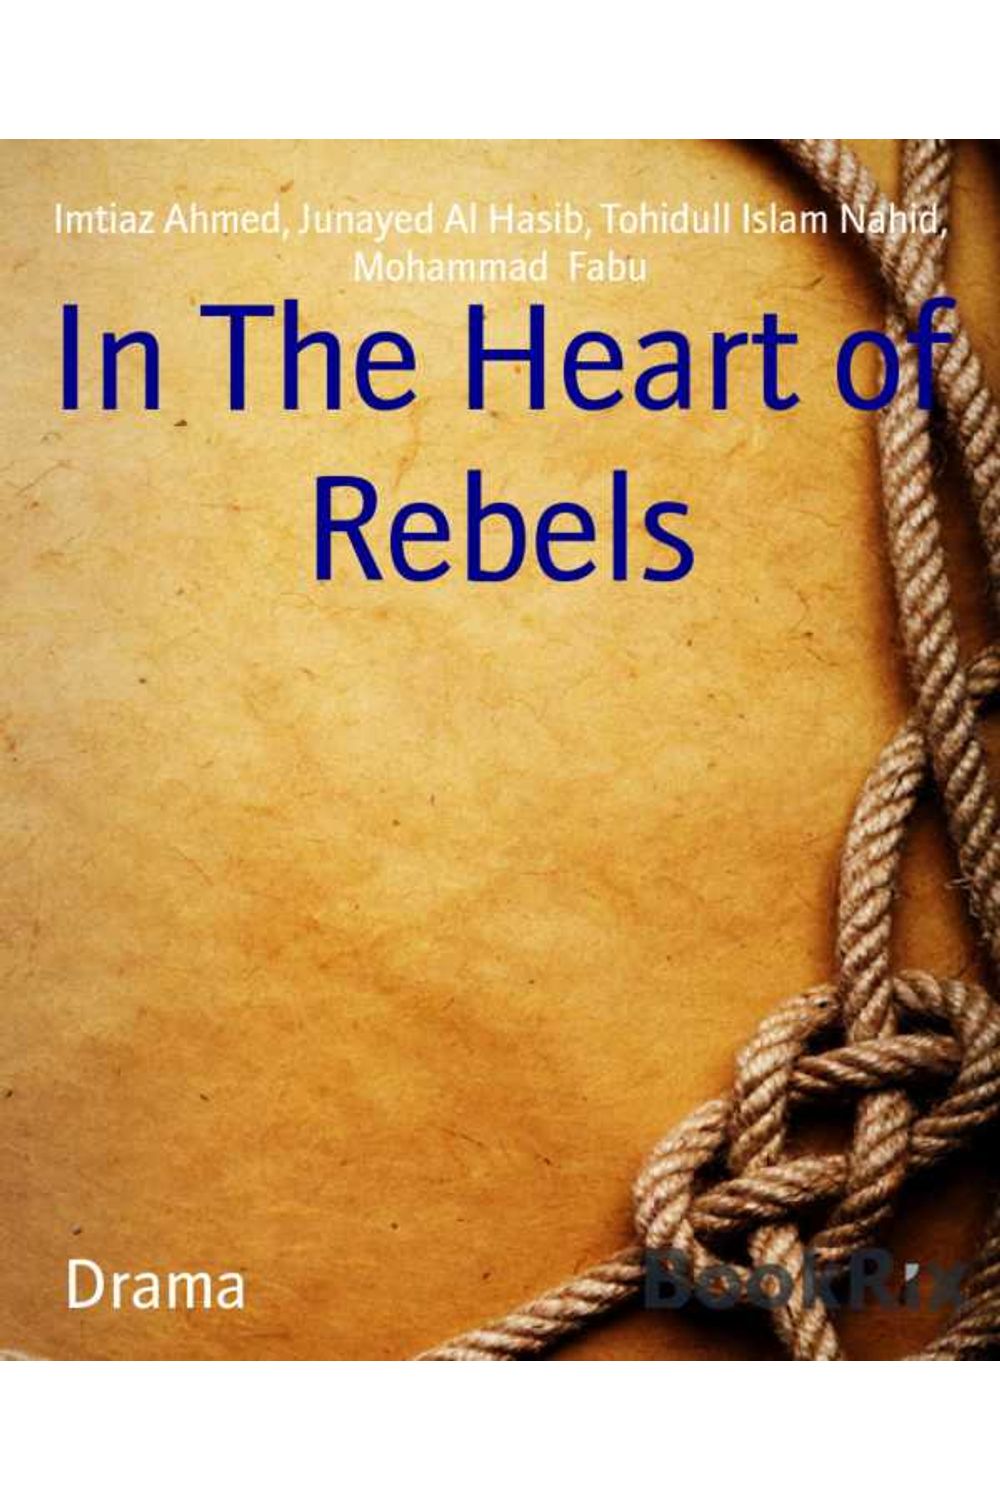 bw-in-the-heart-of-rebels-bookrix-9783748791874